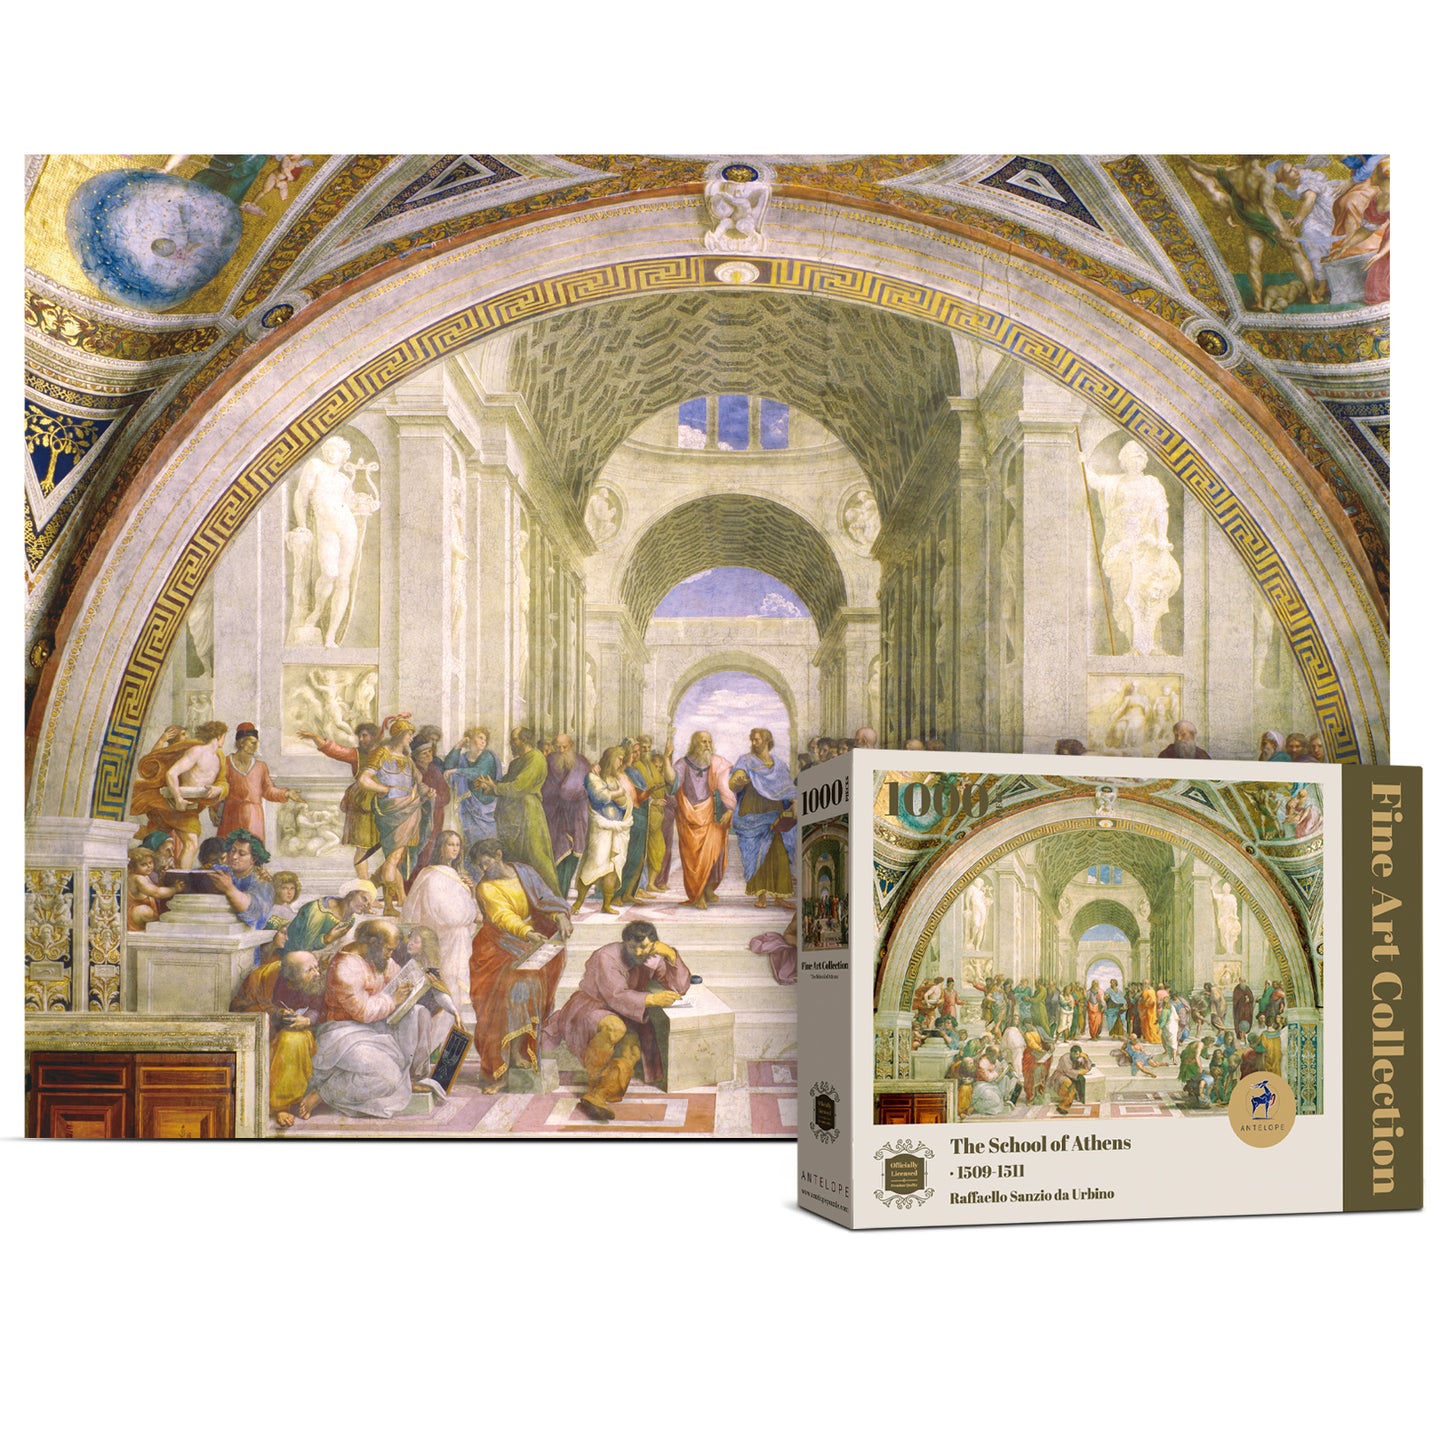 Antelope The School of Athens Fine Art 1000 piece Jigsaw Puzzle